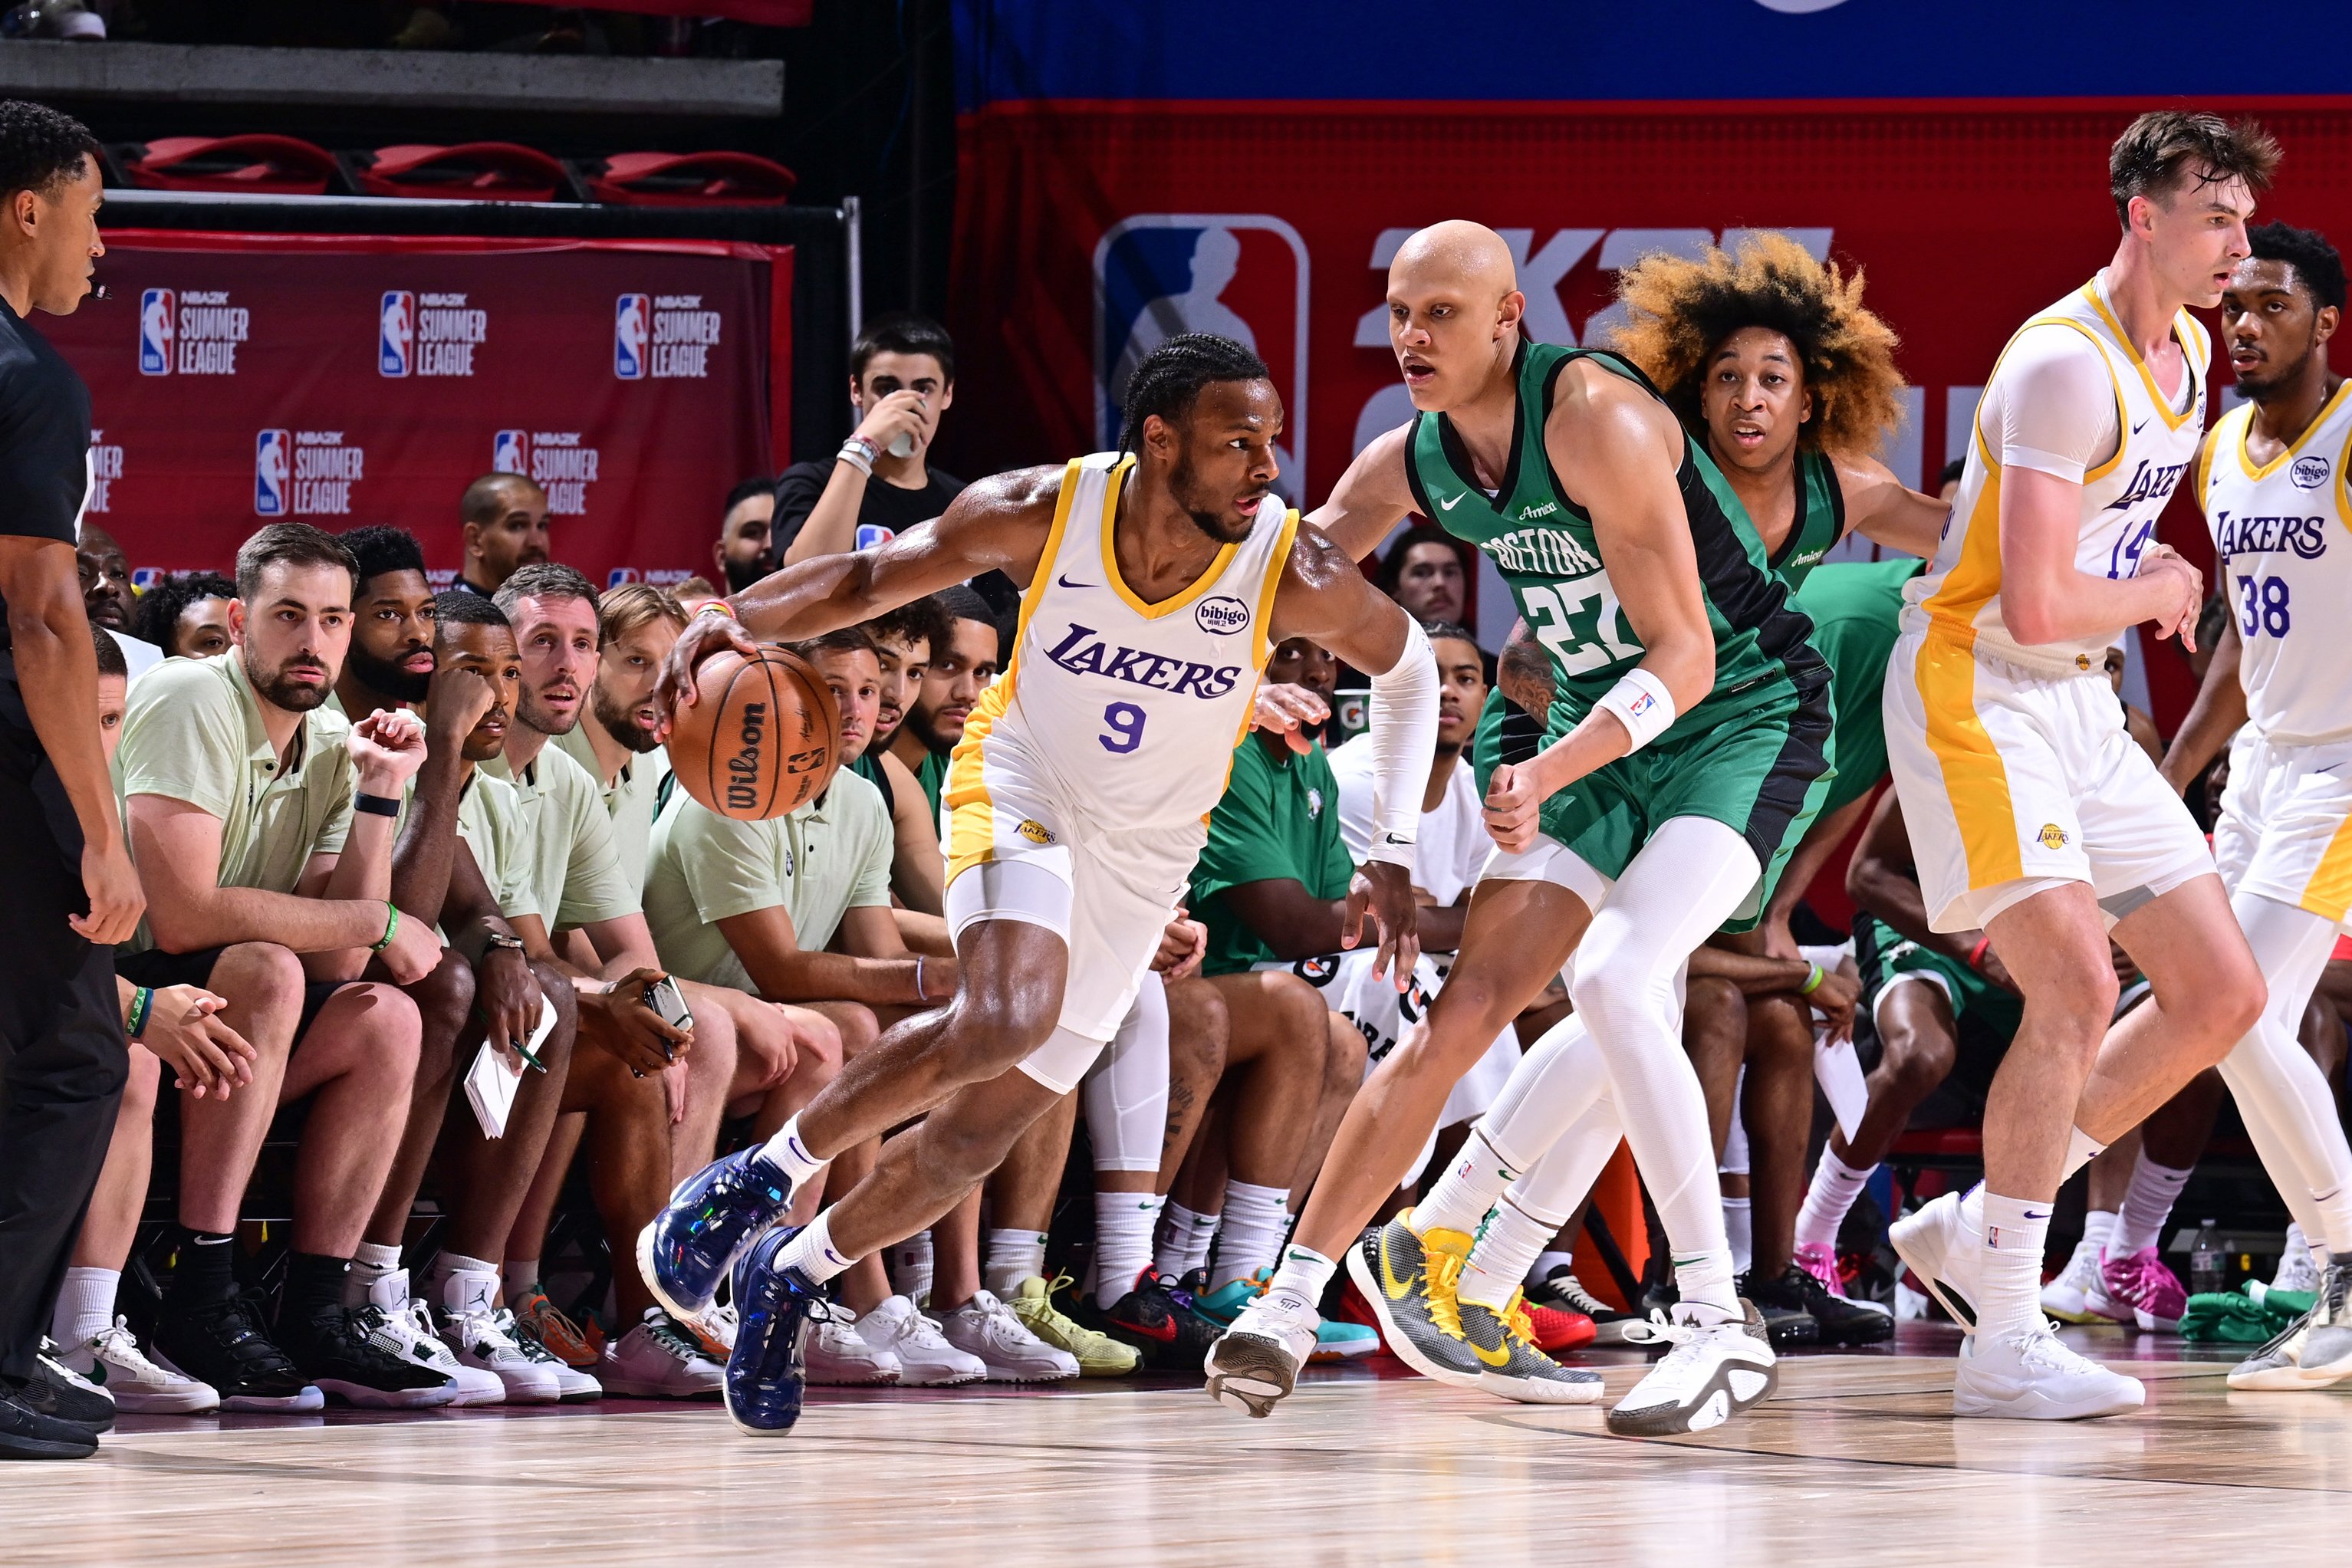 Bronny James Jr. of Los Angeles Lakers dribbles the ball during the game against the Boston Celtics